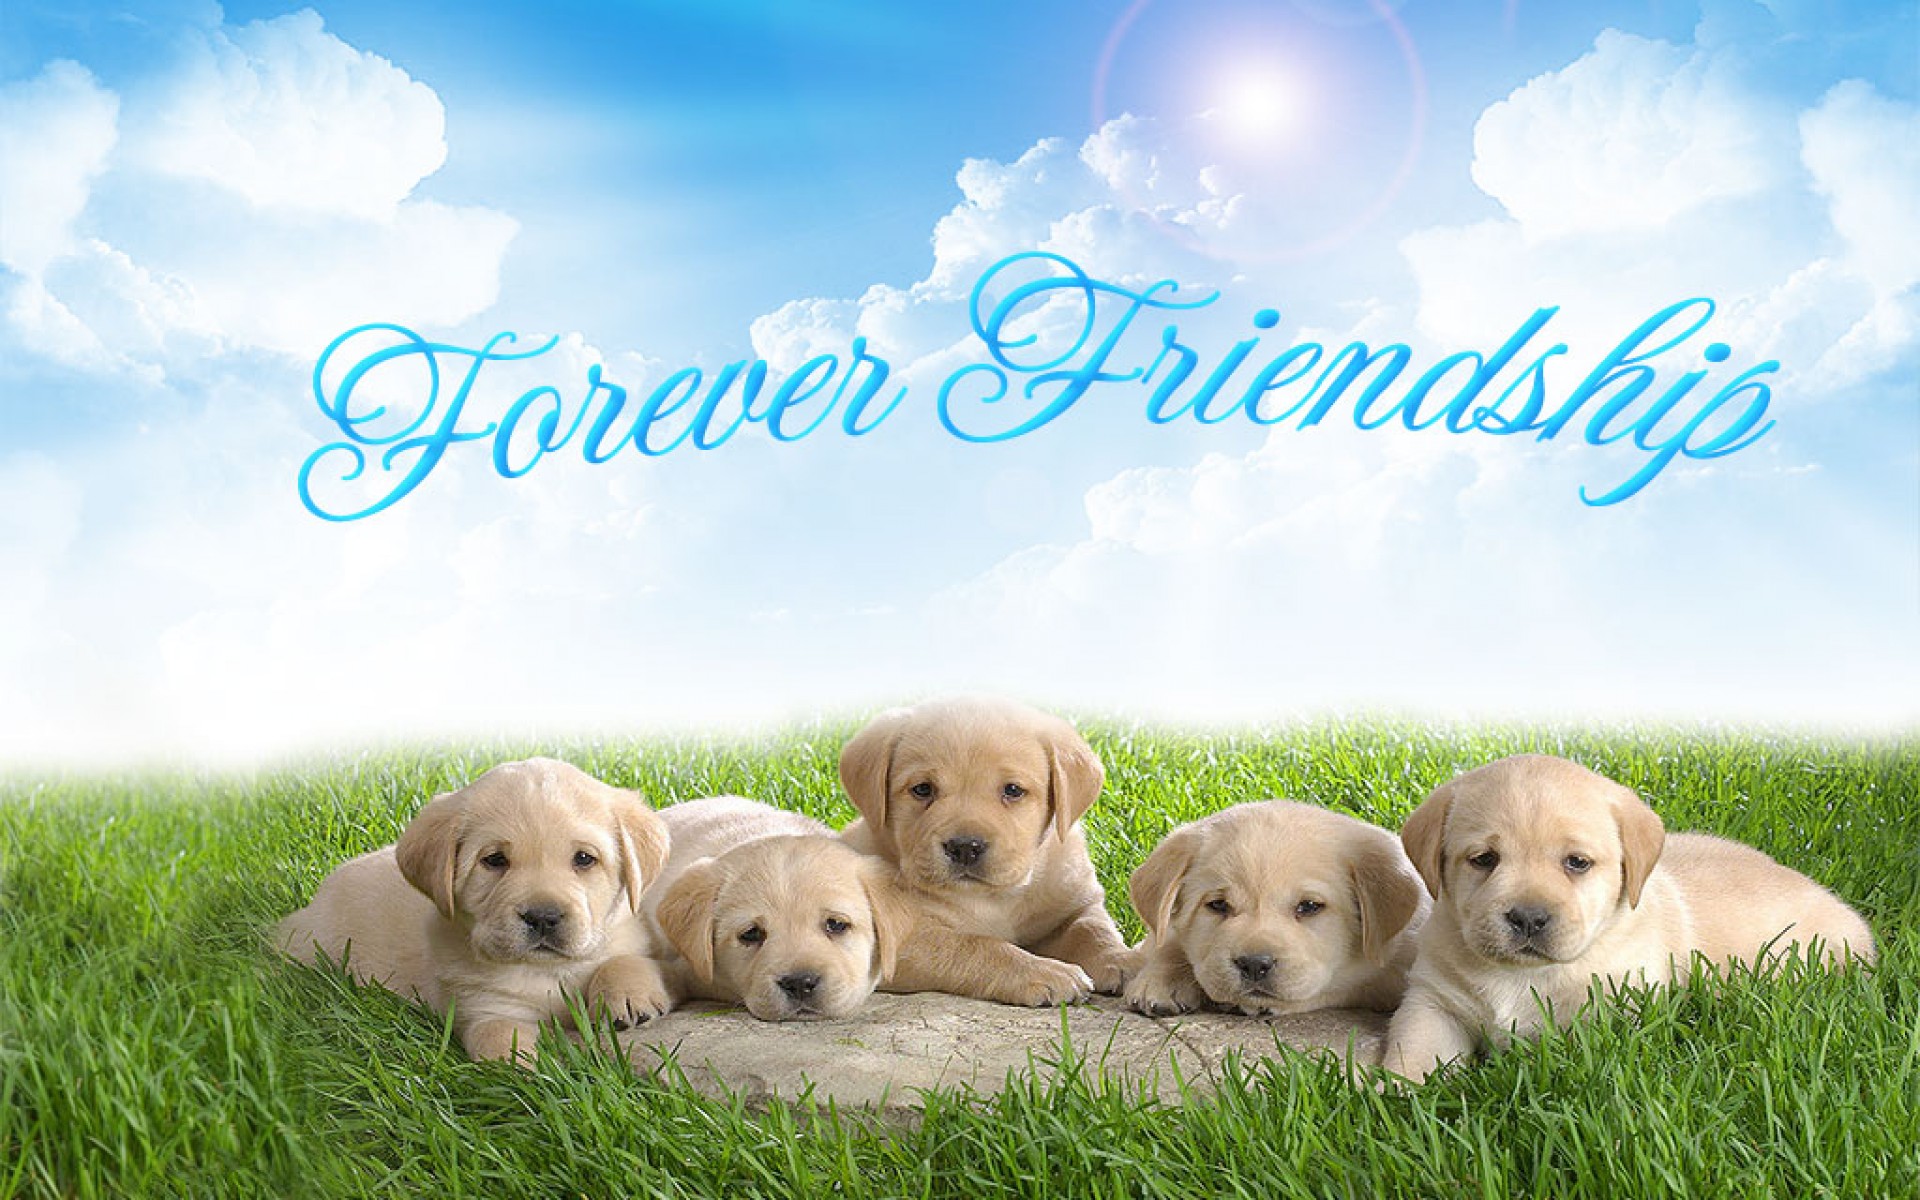 Friendship Hd Wallpapers For Friendship Day - Dosti Wallpaper Free Download , HD Wallpaper & Backgrounds